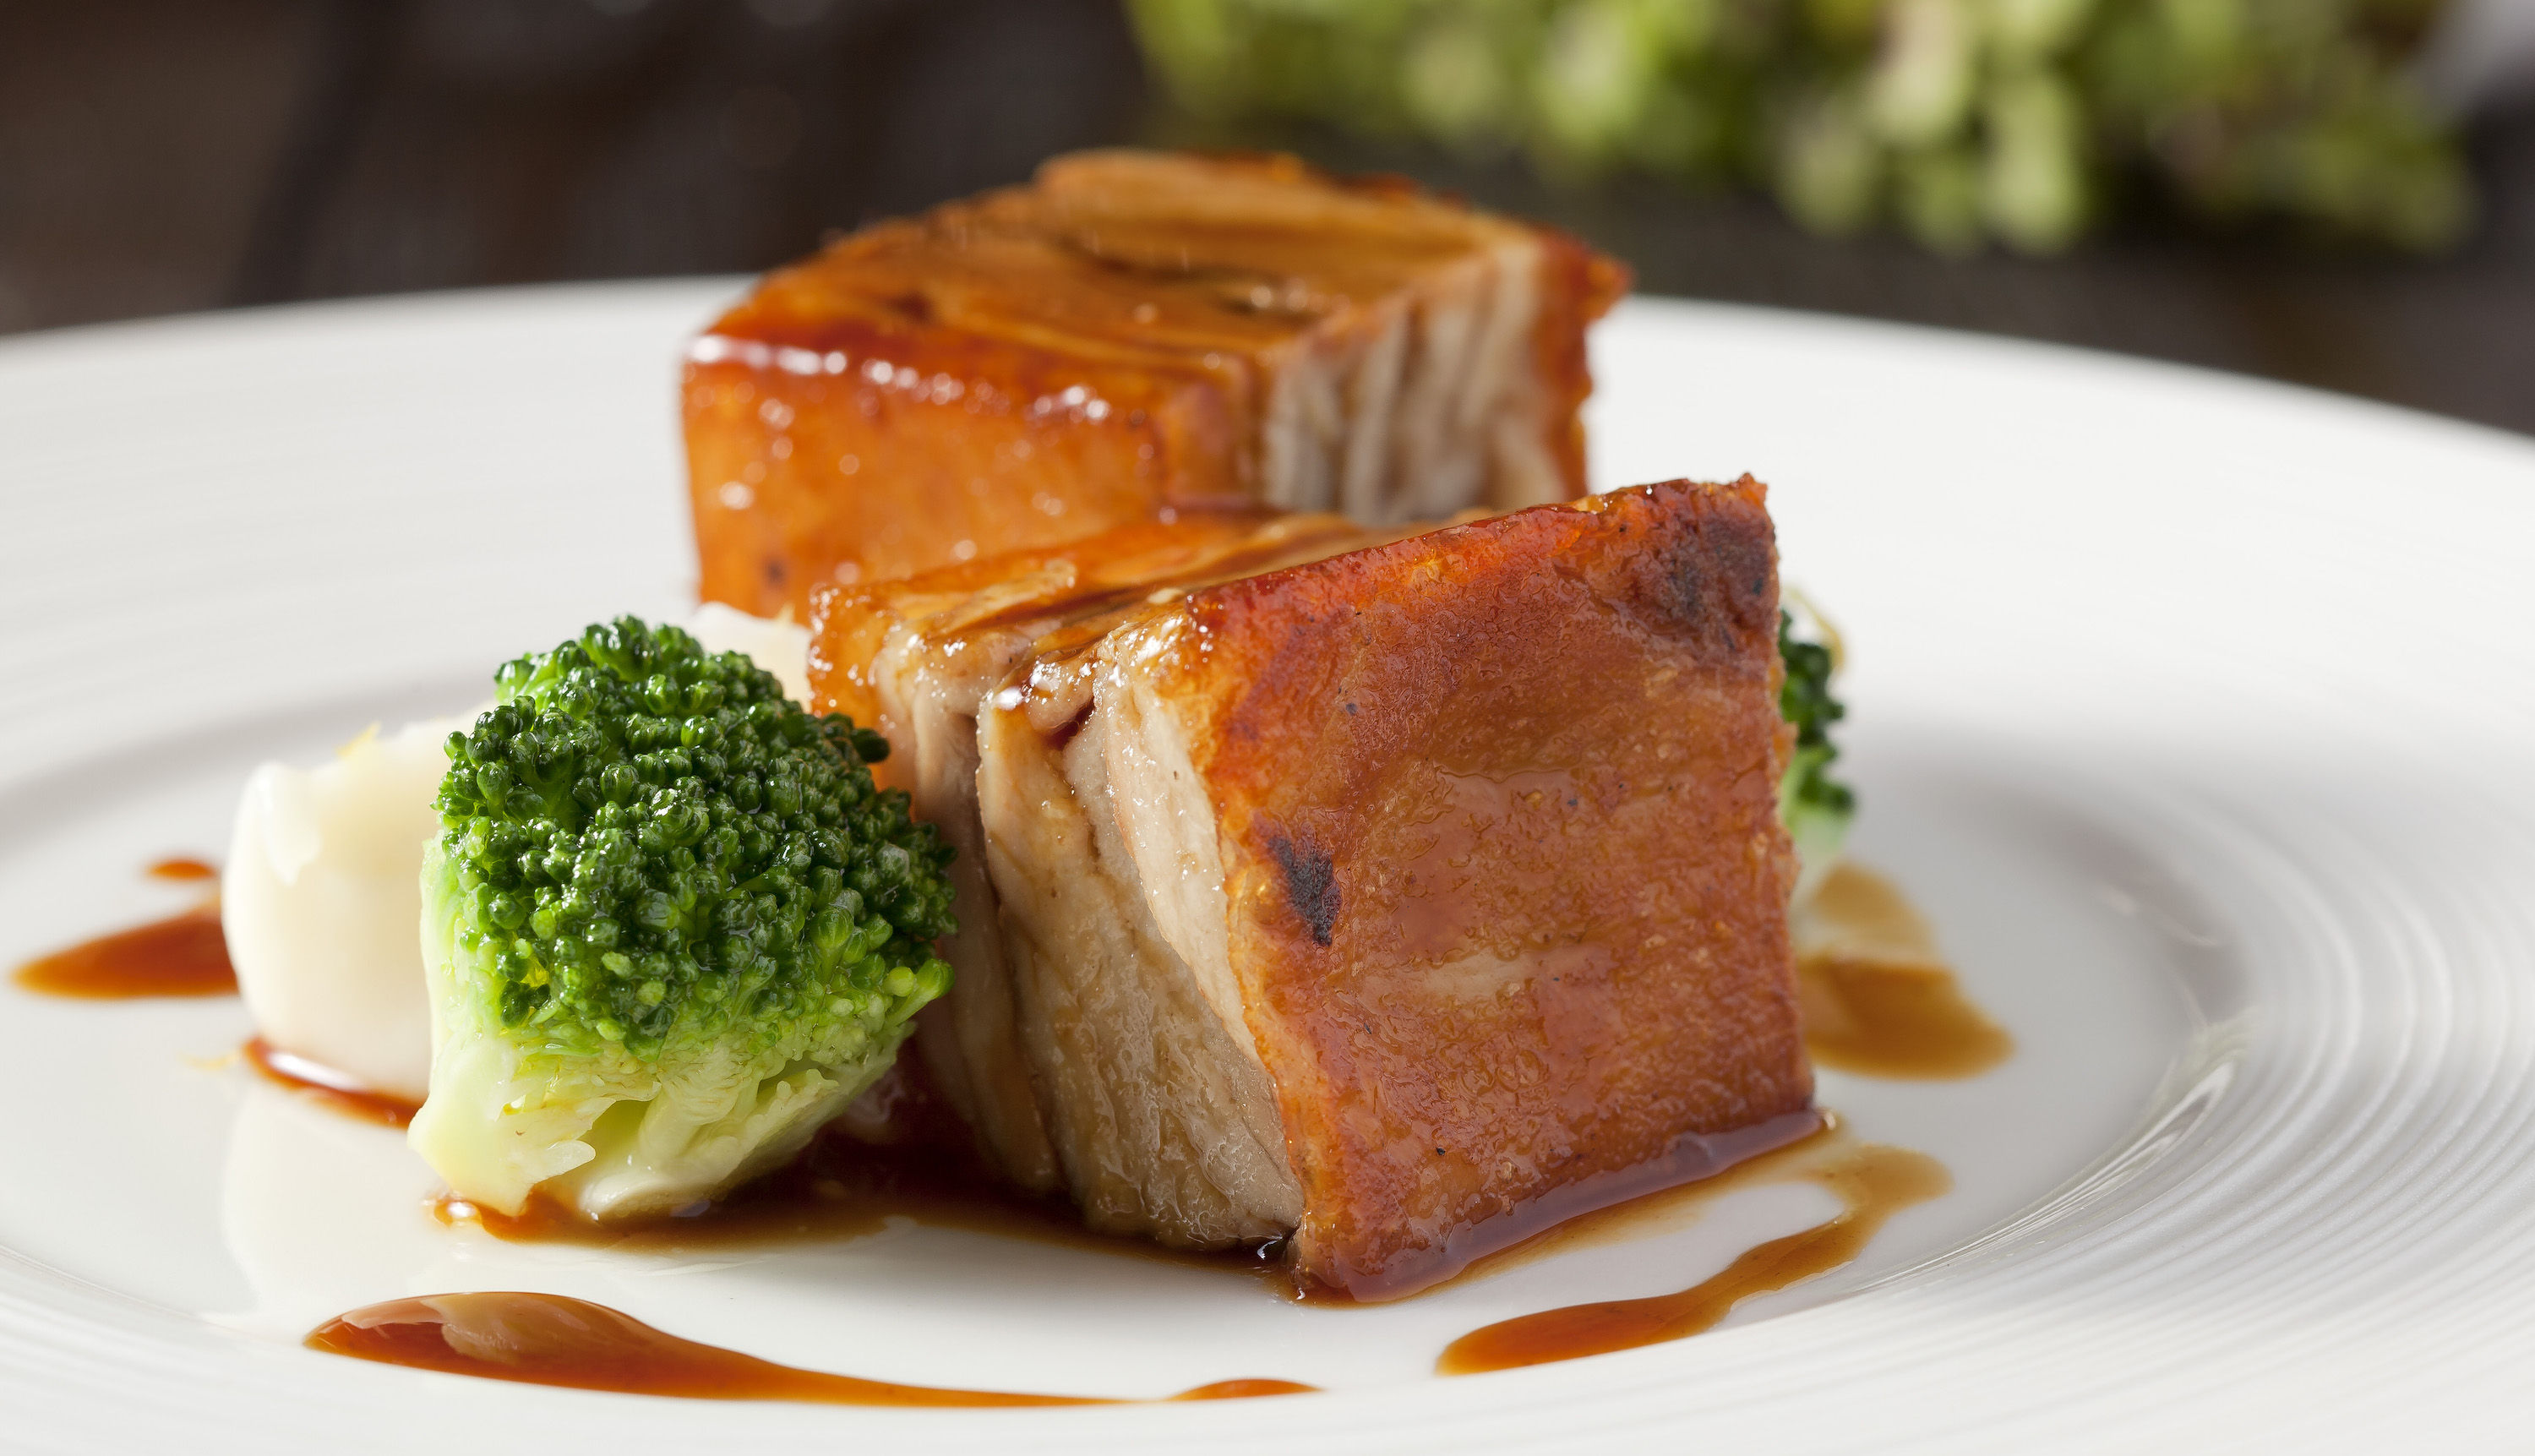 The hunt is on for Hong Kong’s ultimate pork dish